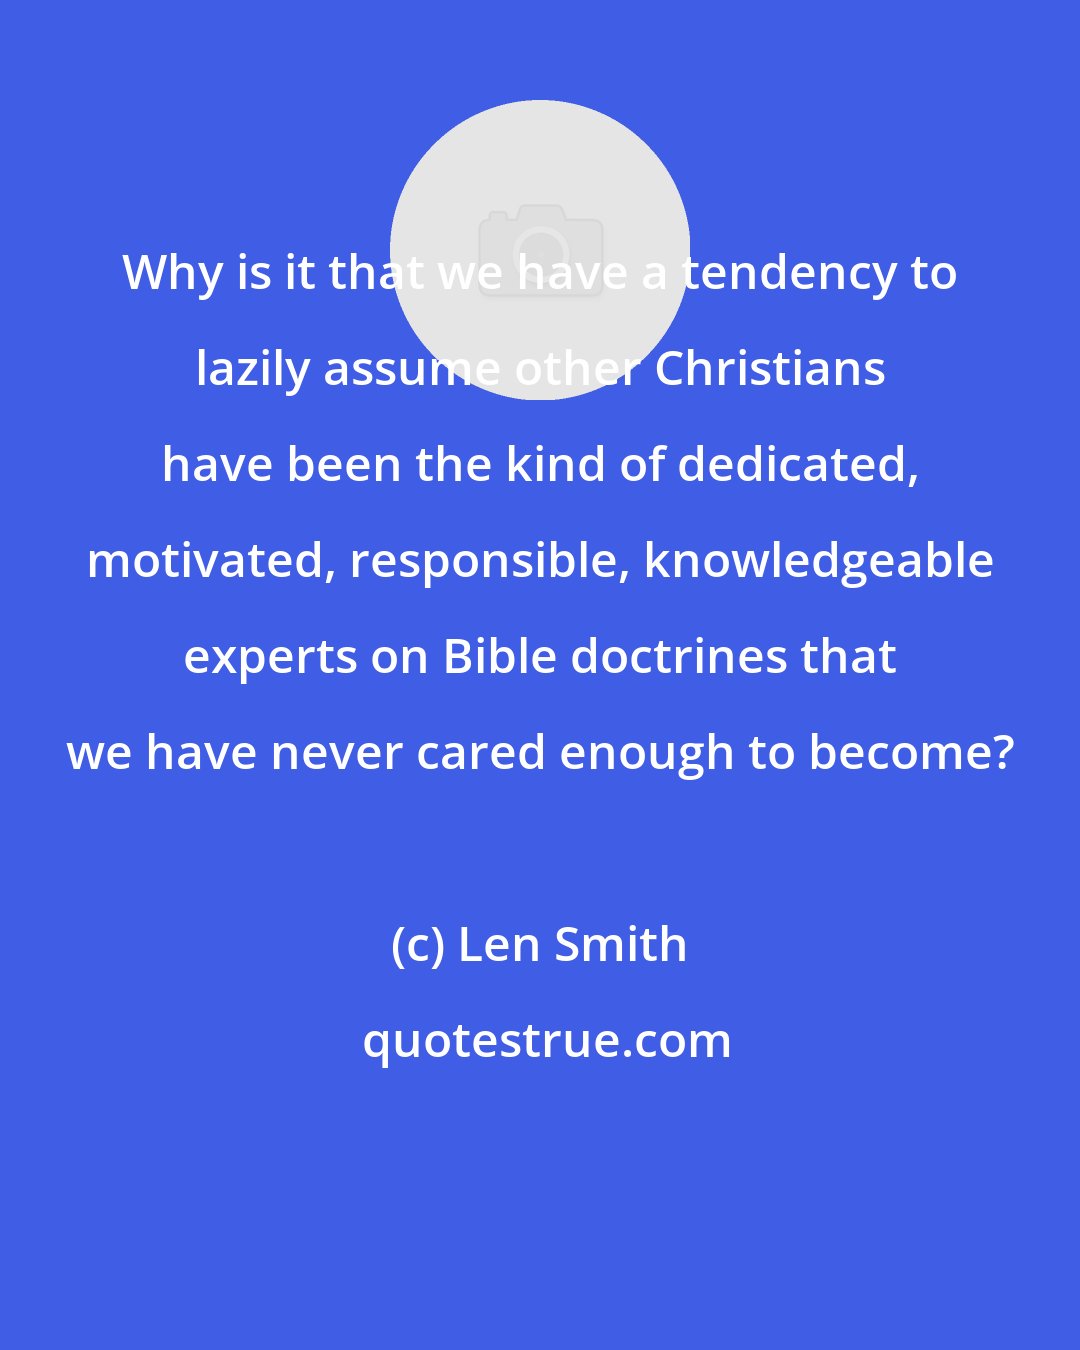 Len Smith: Why is it that we have a tendency to lazily assume other Christians have been the kind of dedicated, motivated, responsible, knowledgeable experts on Bible doctrines that we have never cared enough to become?